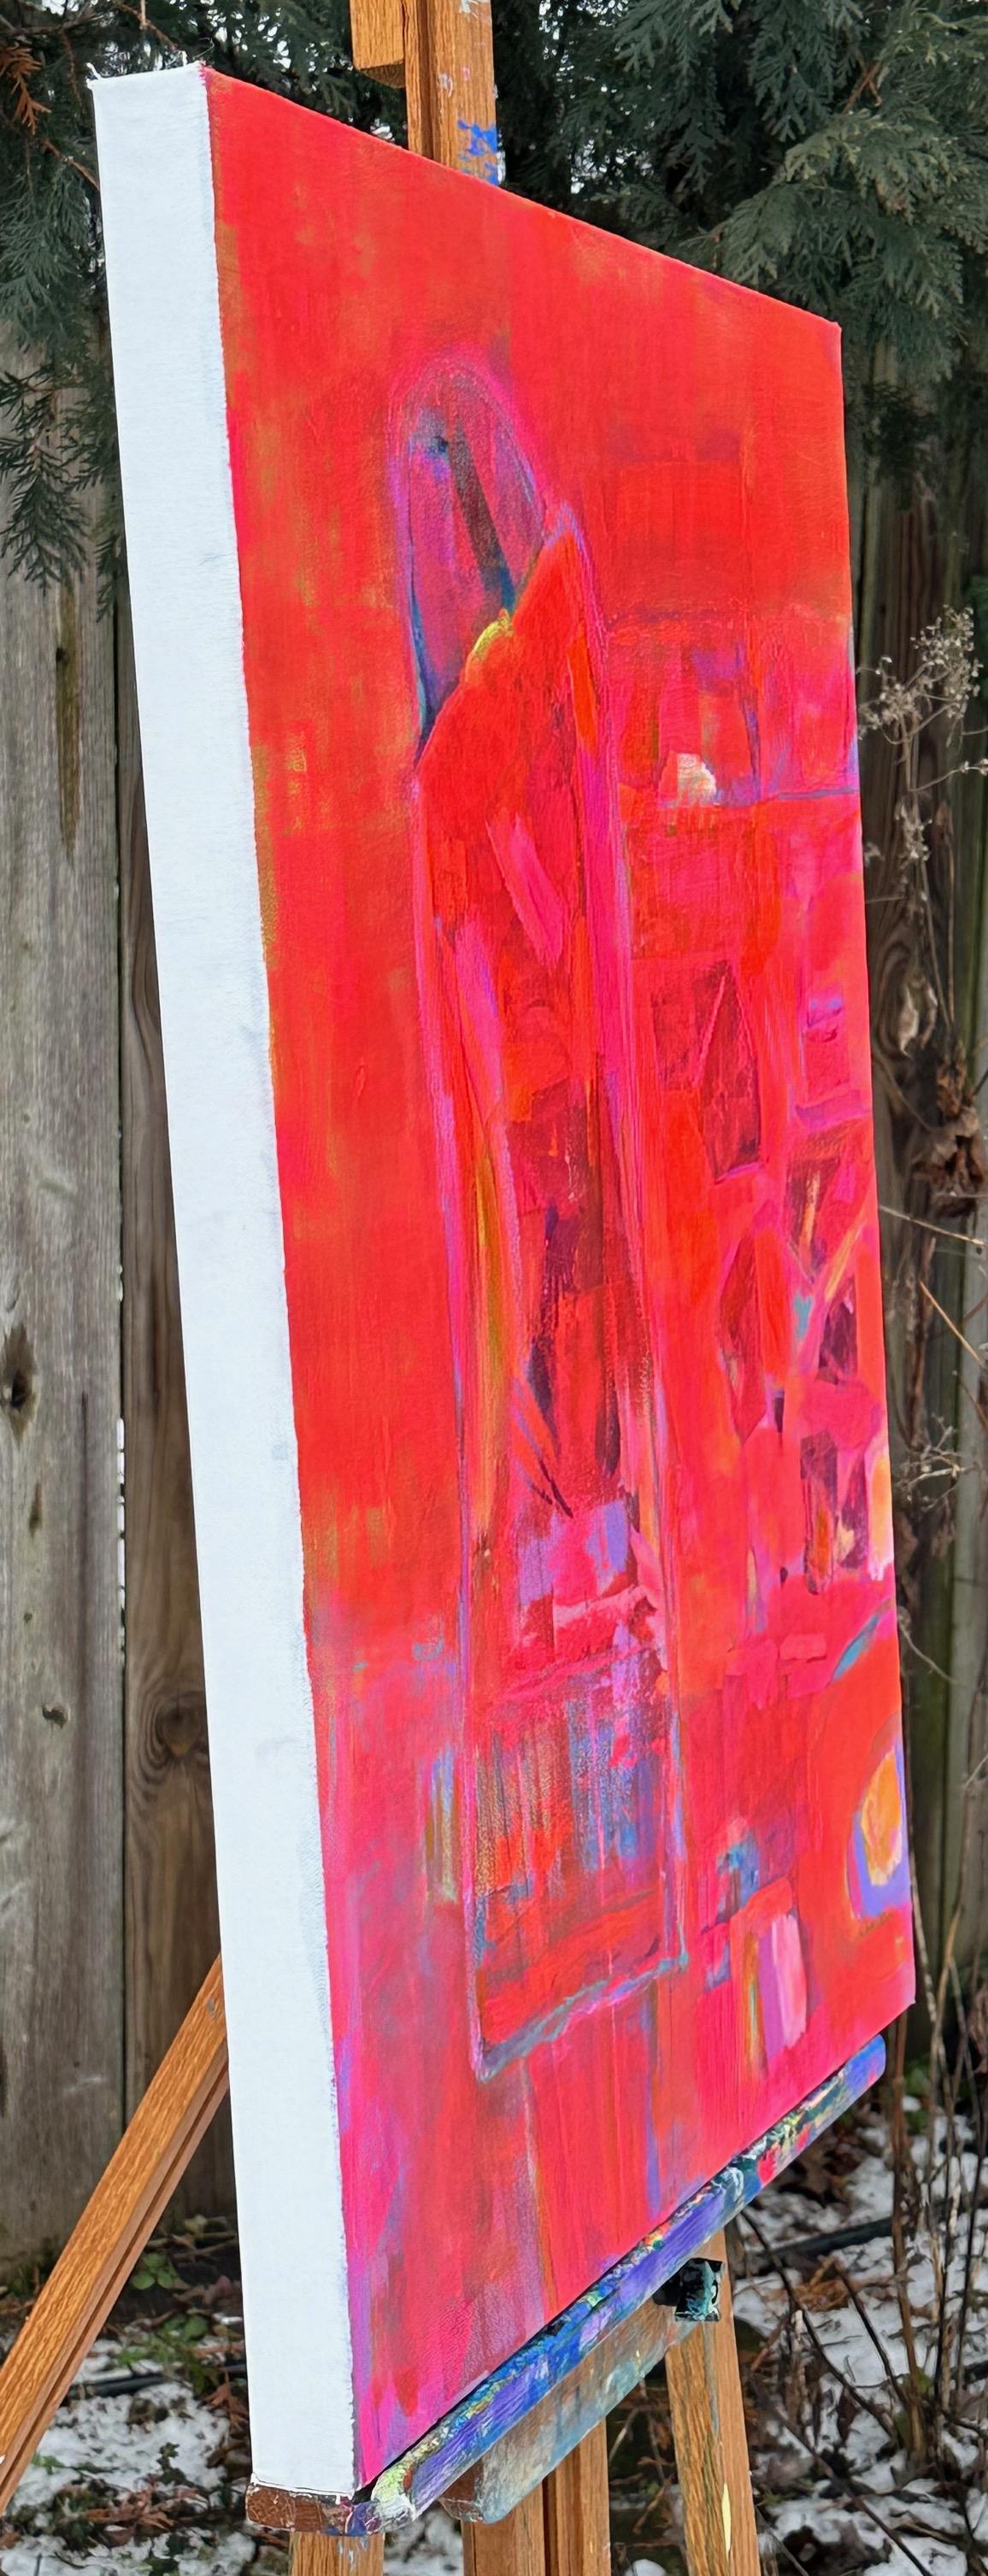 <p>Artist Comments<br>Artist Robin weaves a dynamic interplay of color, line, and shape in this abstract image of a woman. Fused with shades of red, the piece achieves a unique simplicity, with various shapes and accent tones contributing to its